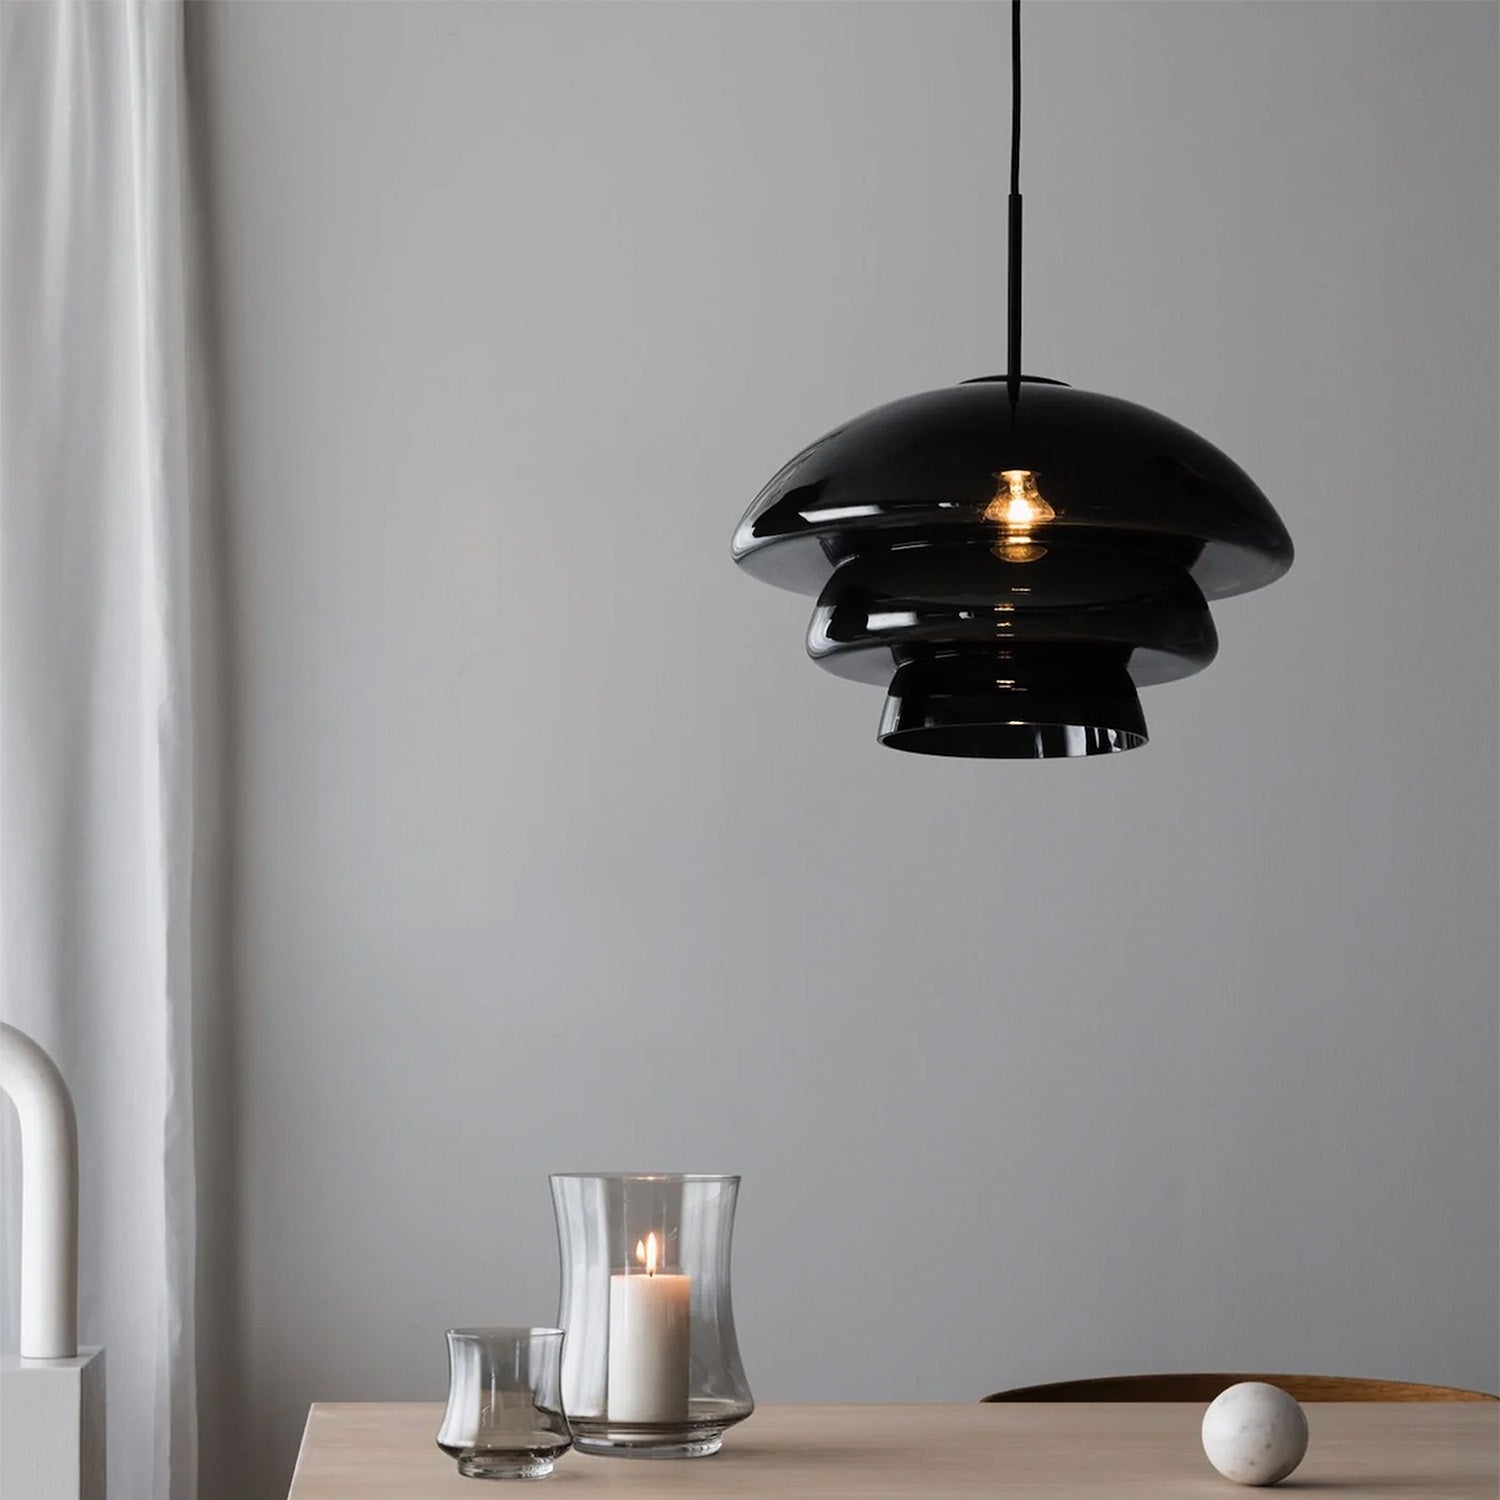 ARCHIVE 4006 - Handcrafted blown glass pendant lamp